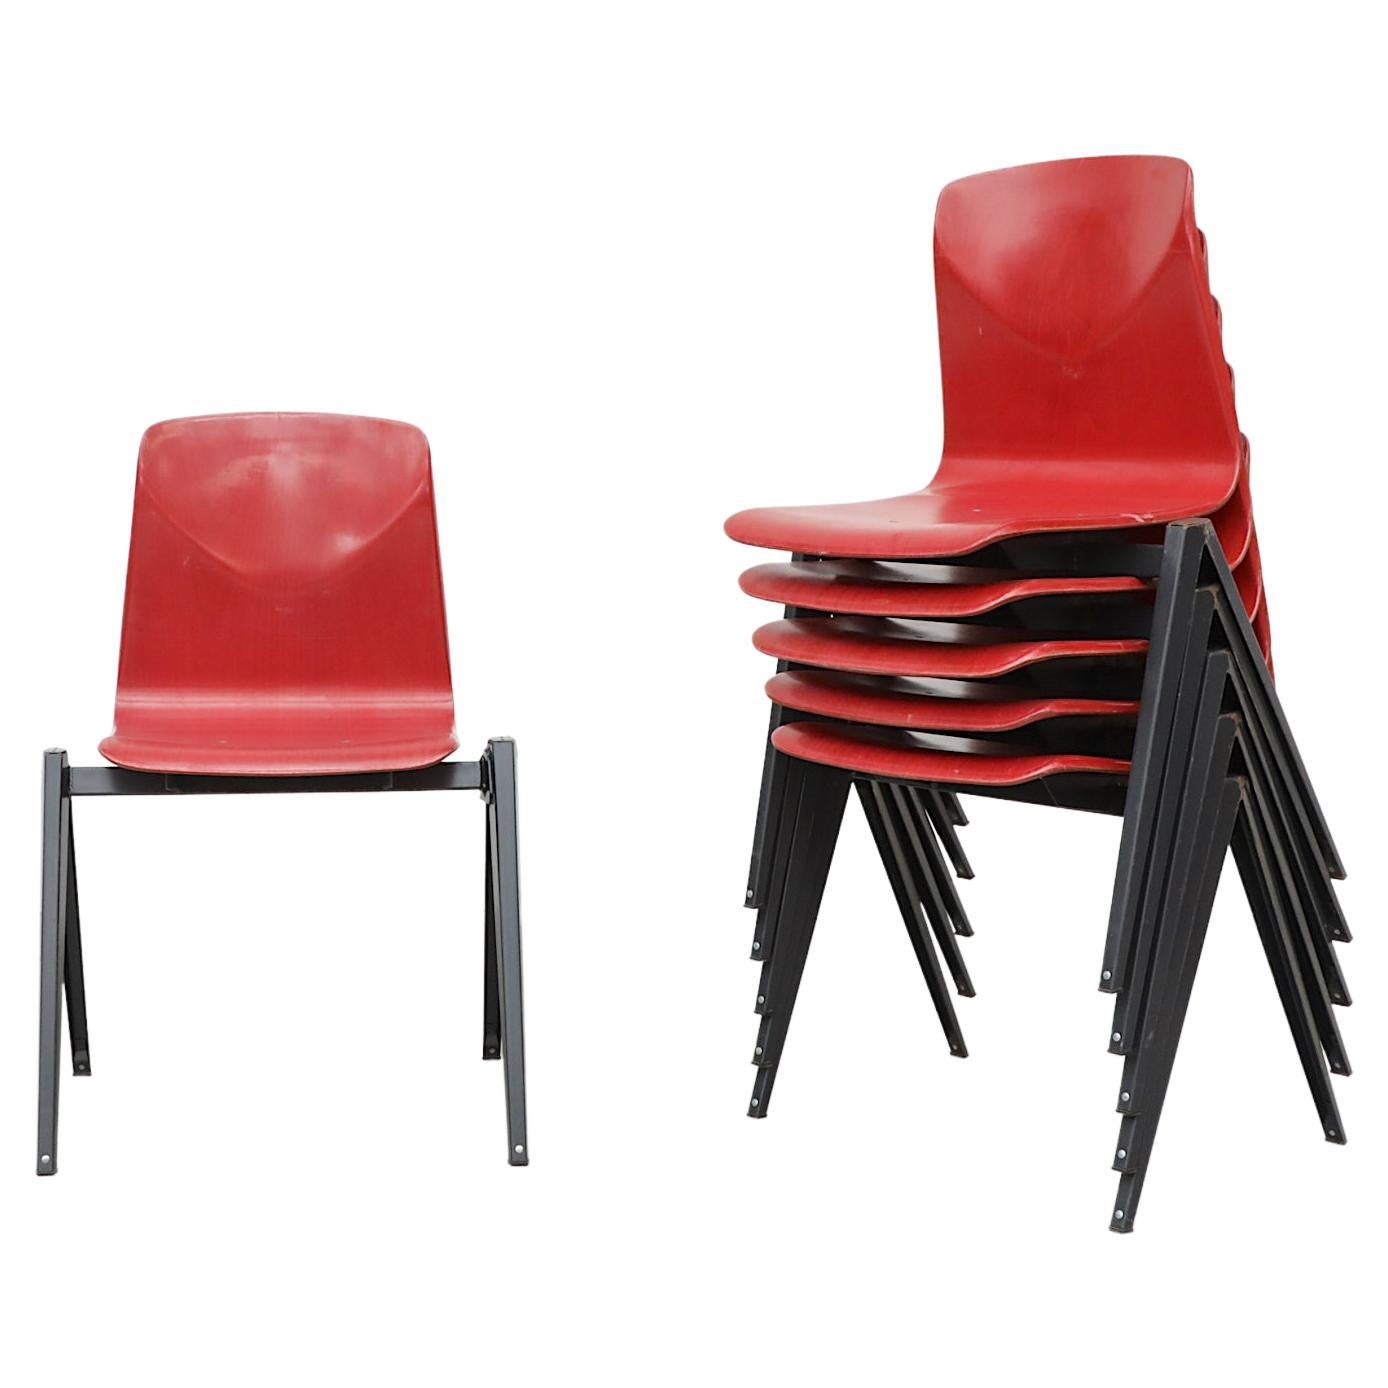 Rare Red Prouve Style Stacking Chairs with Dark Metal Compass Legs